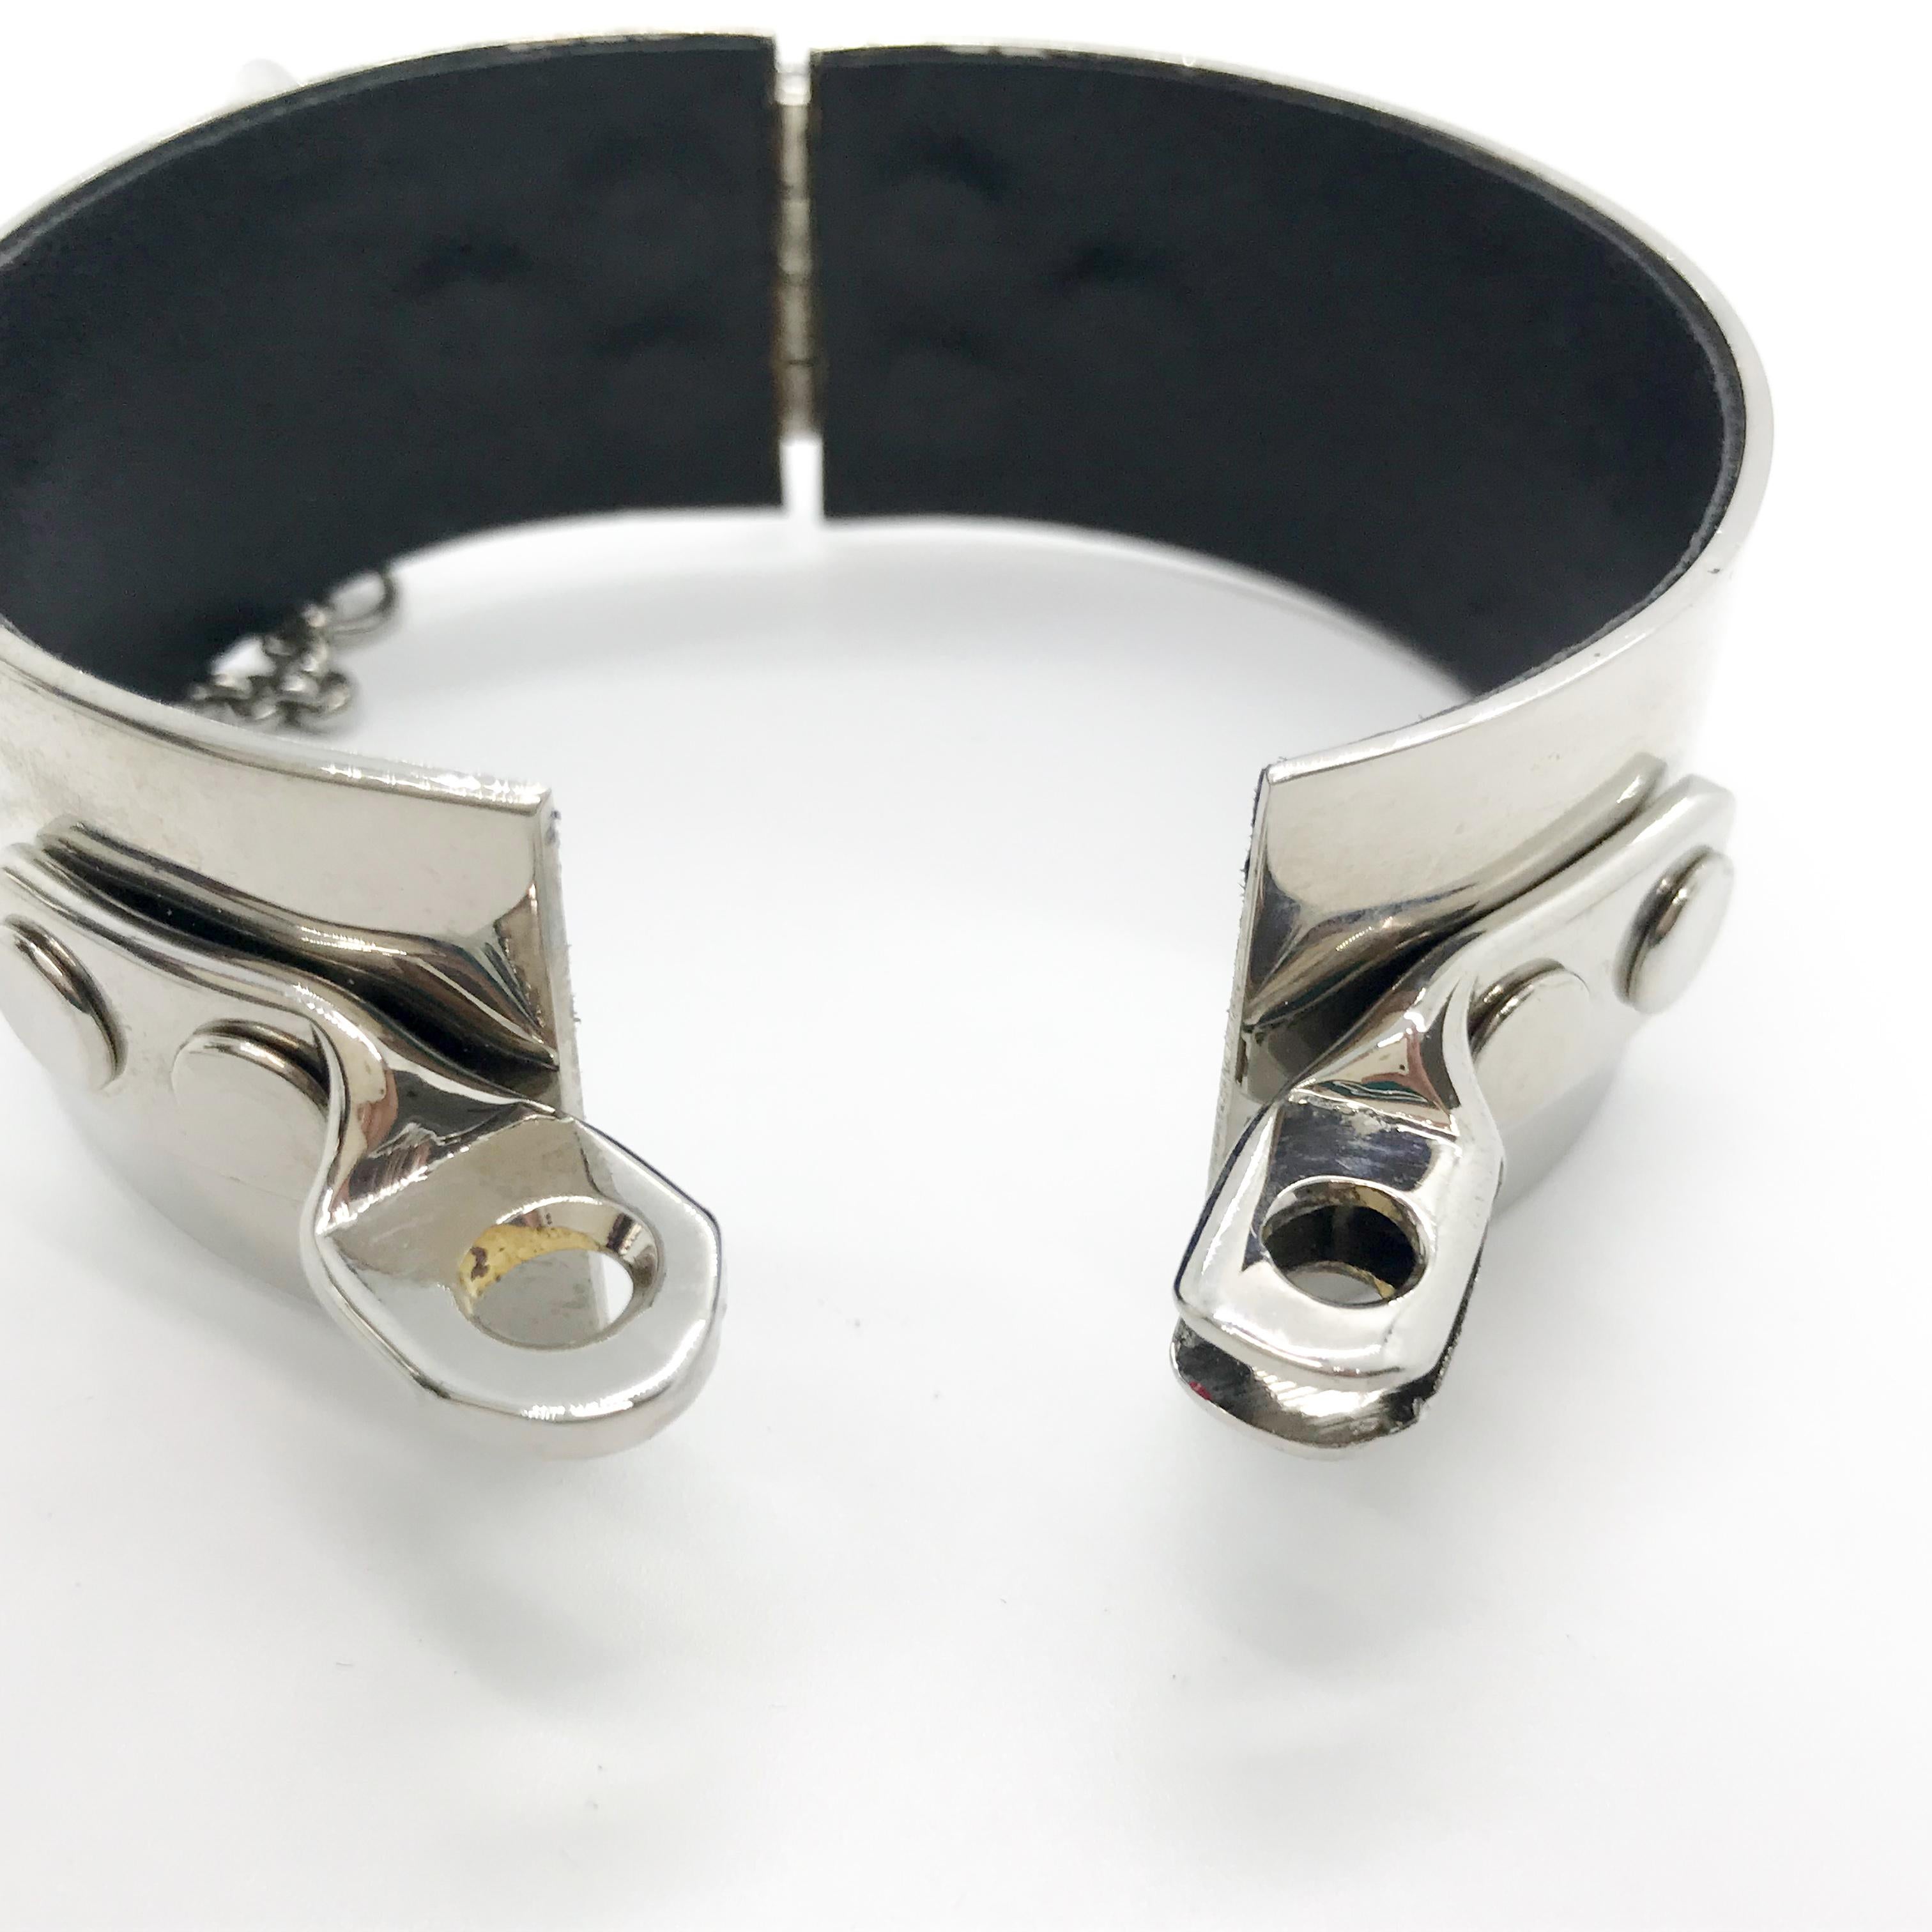 Dolce & Gabbana Handcuff Bracelet Bondage Collection 1999 In Excellent Condition For Sale In London, GB